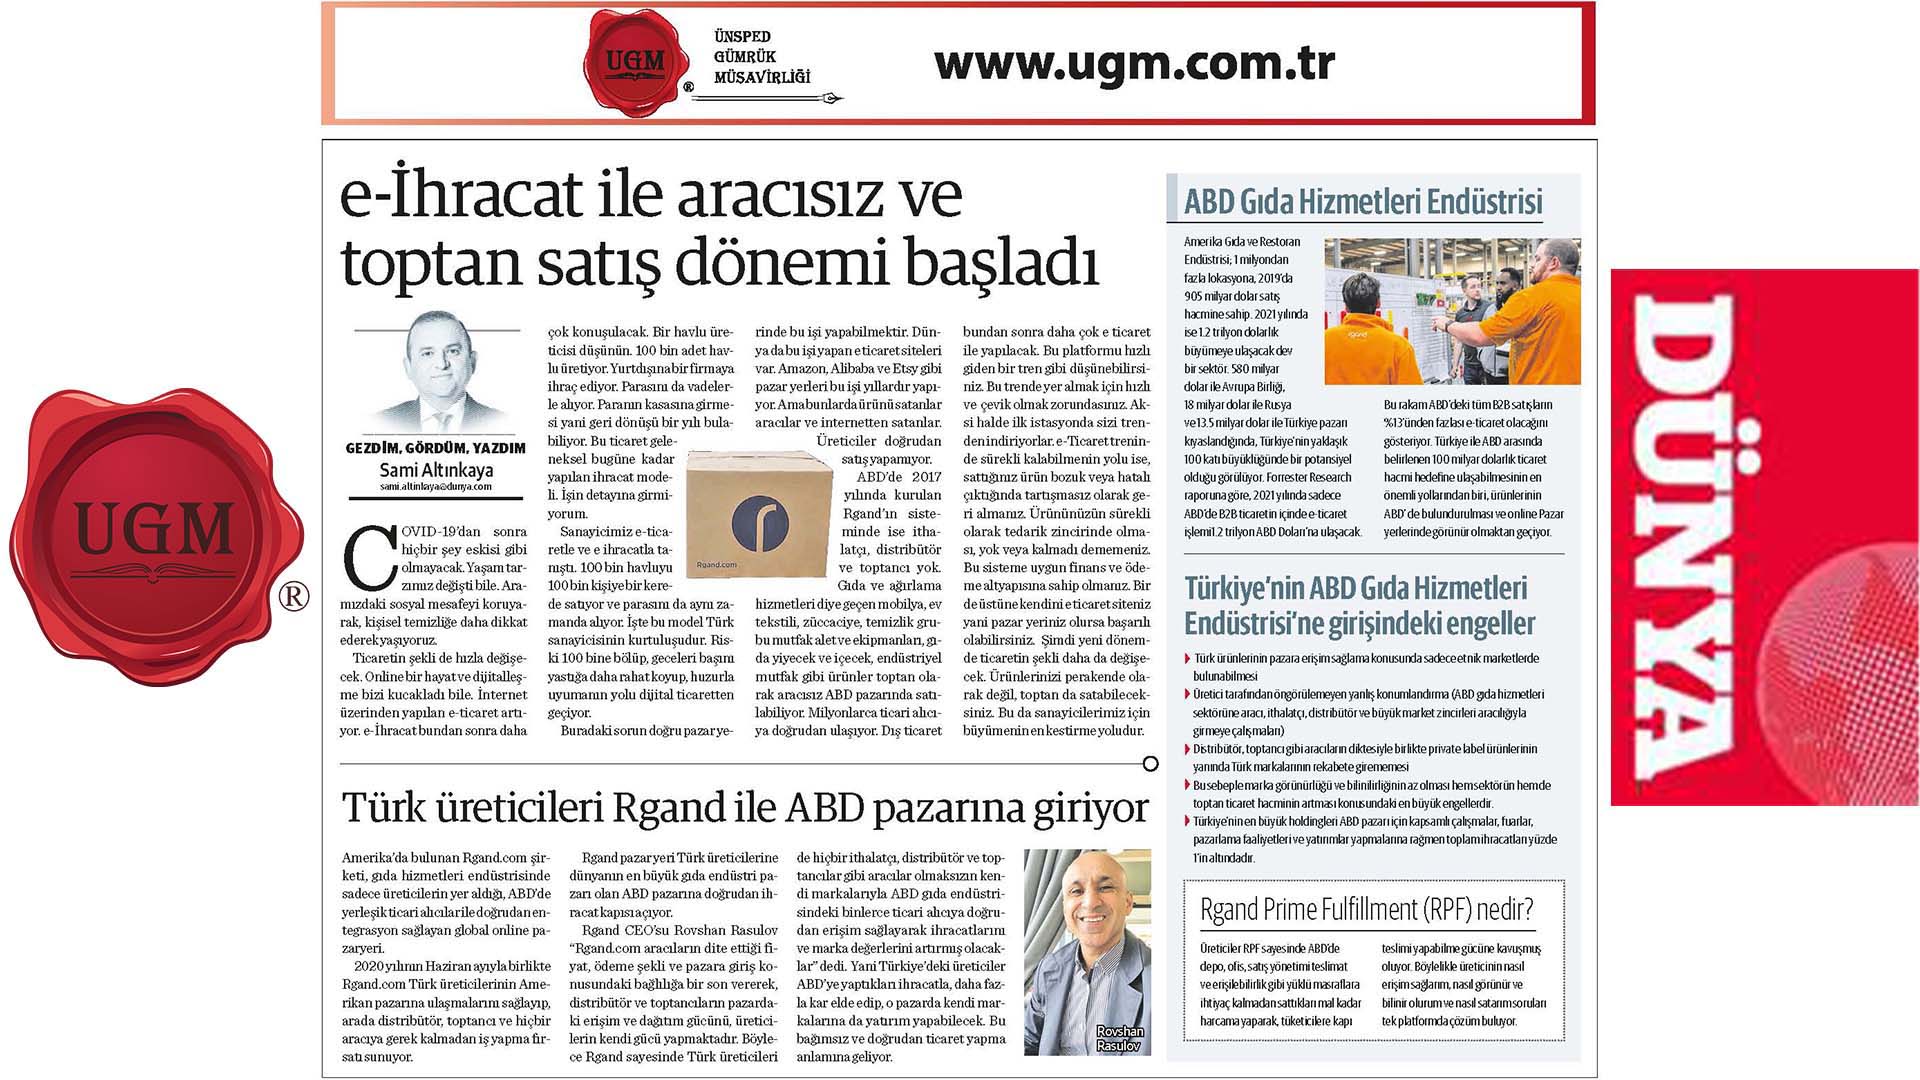 Our UGM Corporate Communications Director Mr. Sami Altınkaya's article titled "The Period of Wholesale and E-Export Started With E-Export" Has Been Published in Dünya Newspaper on 20.04.2020.